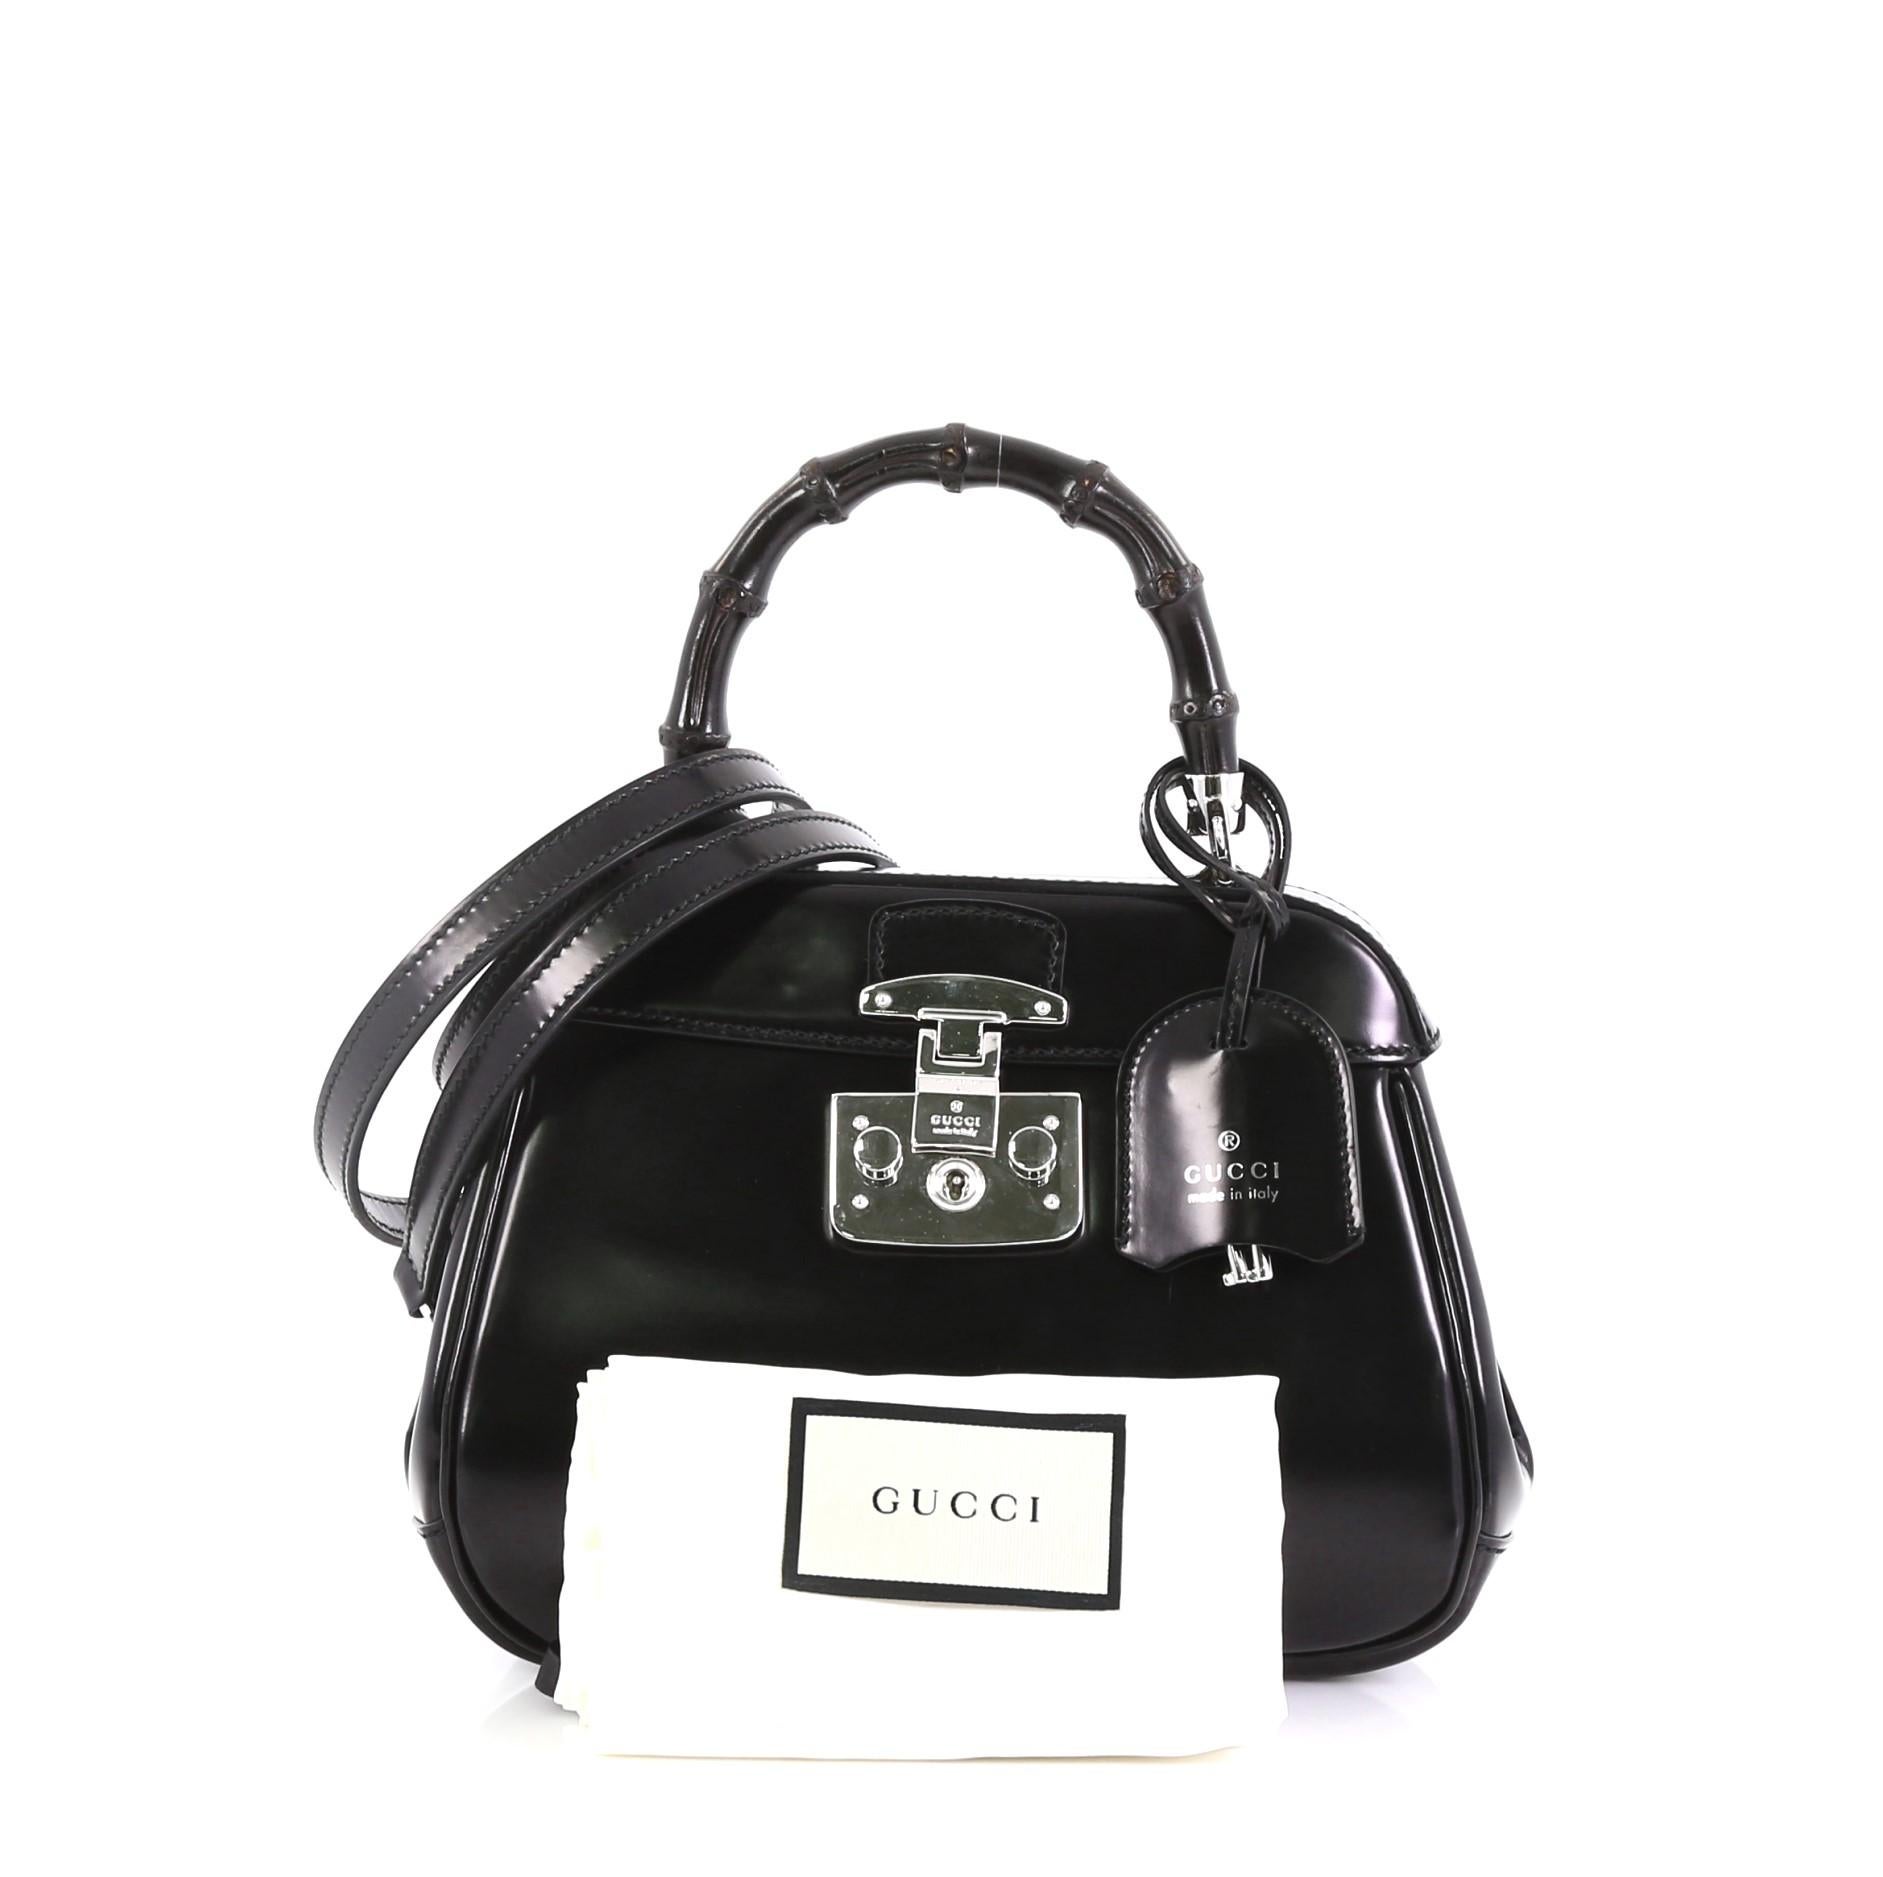 This Gucci Lady Lock Bamboo Top Handle Bag Leather Mini, crafted in black leather, features a single loop bamboo handle and silver-tone hardware. Its flap with lady lock closure opens to a purple suede interior with snap and zip pockets. 

Estimated